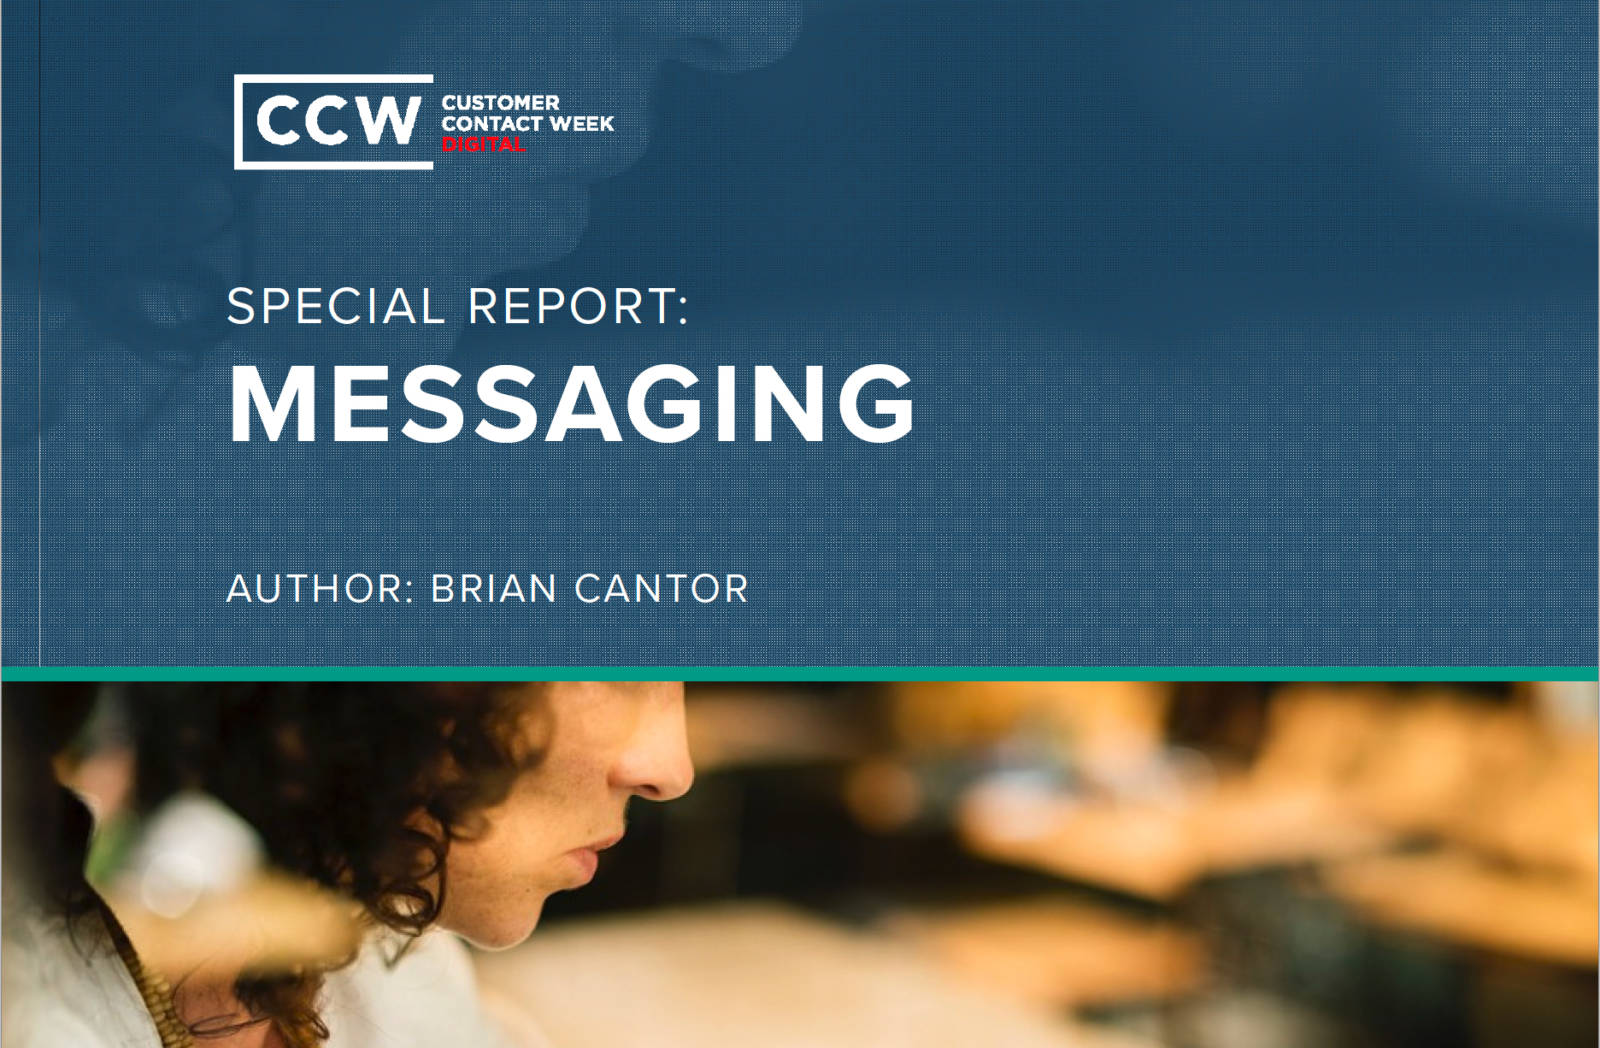 Customer Contact Week Digital Special Report: Messaging by author Brian Cantor